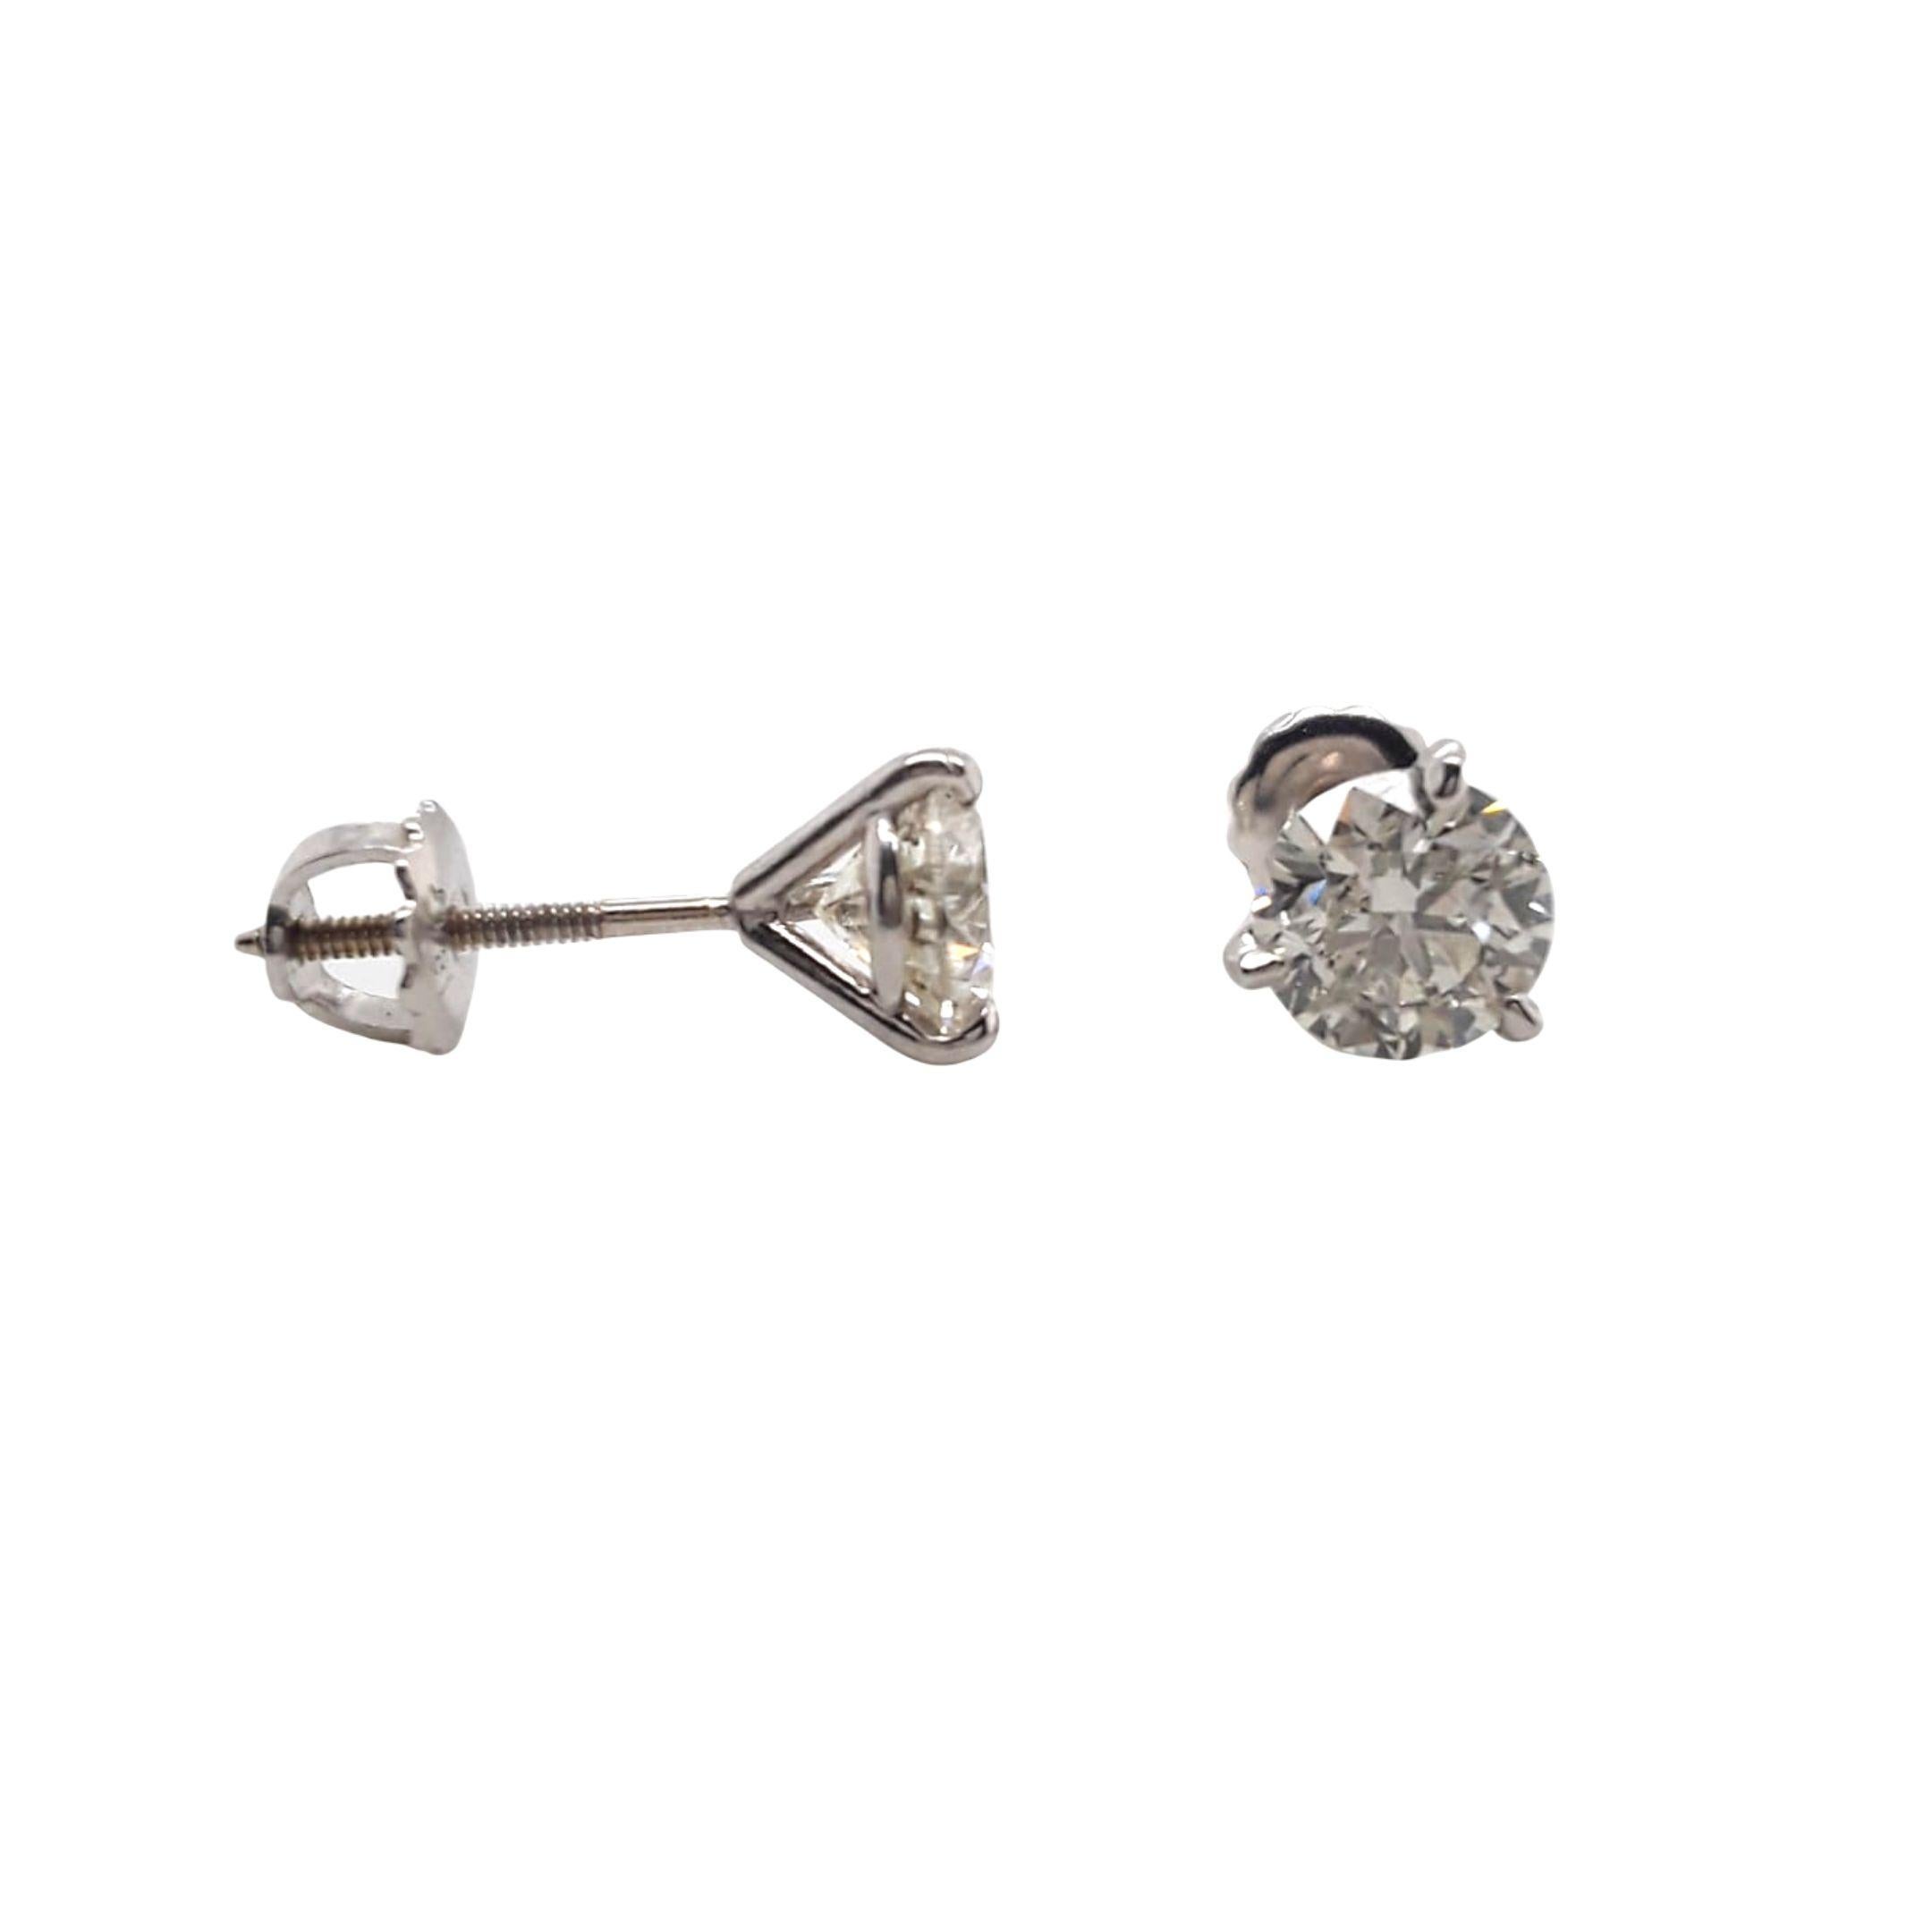 EGL Certified Diamond Stud Earrings made with natural brilliant cut diamonds. Total Weight: 2.04 carats, Stone Diameter: 6.36 x 6.27, Color: G-H, Clarity: SI3. Set on a 3 prong mounting in 18 karat white gold, screw back setting. 